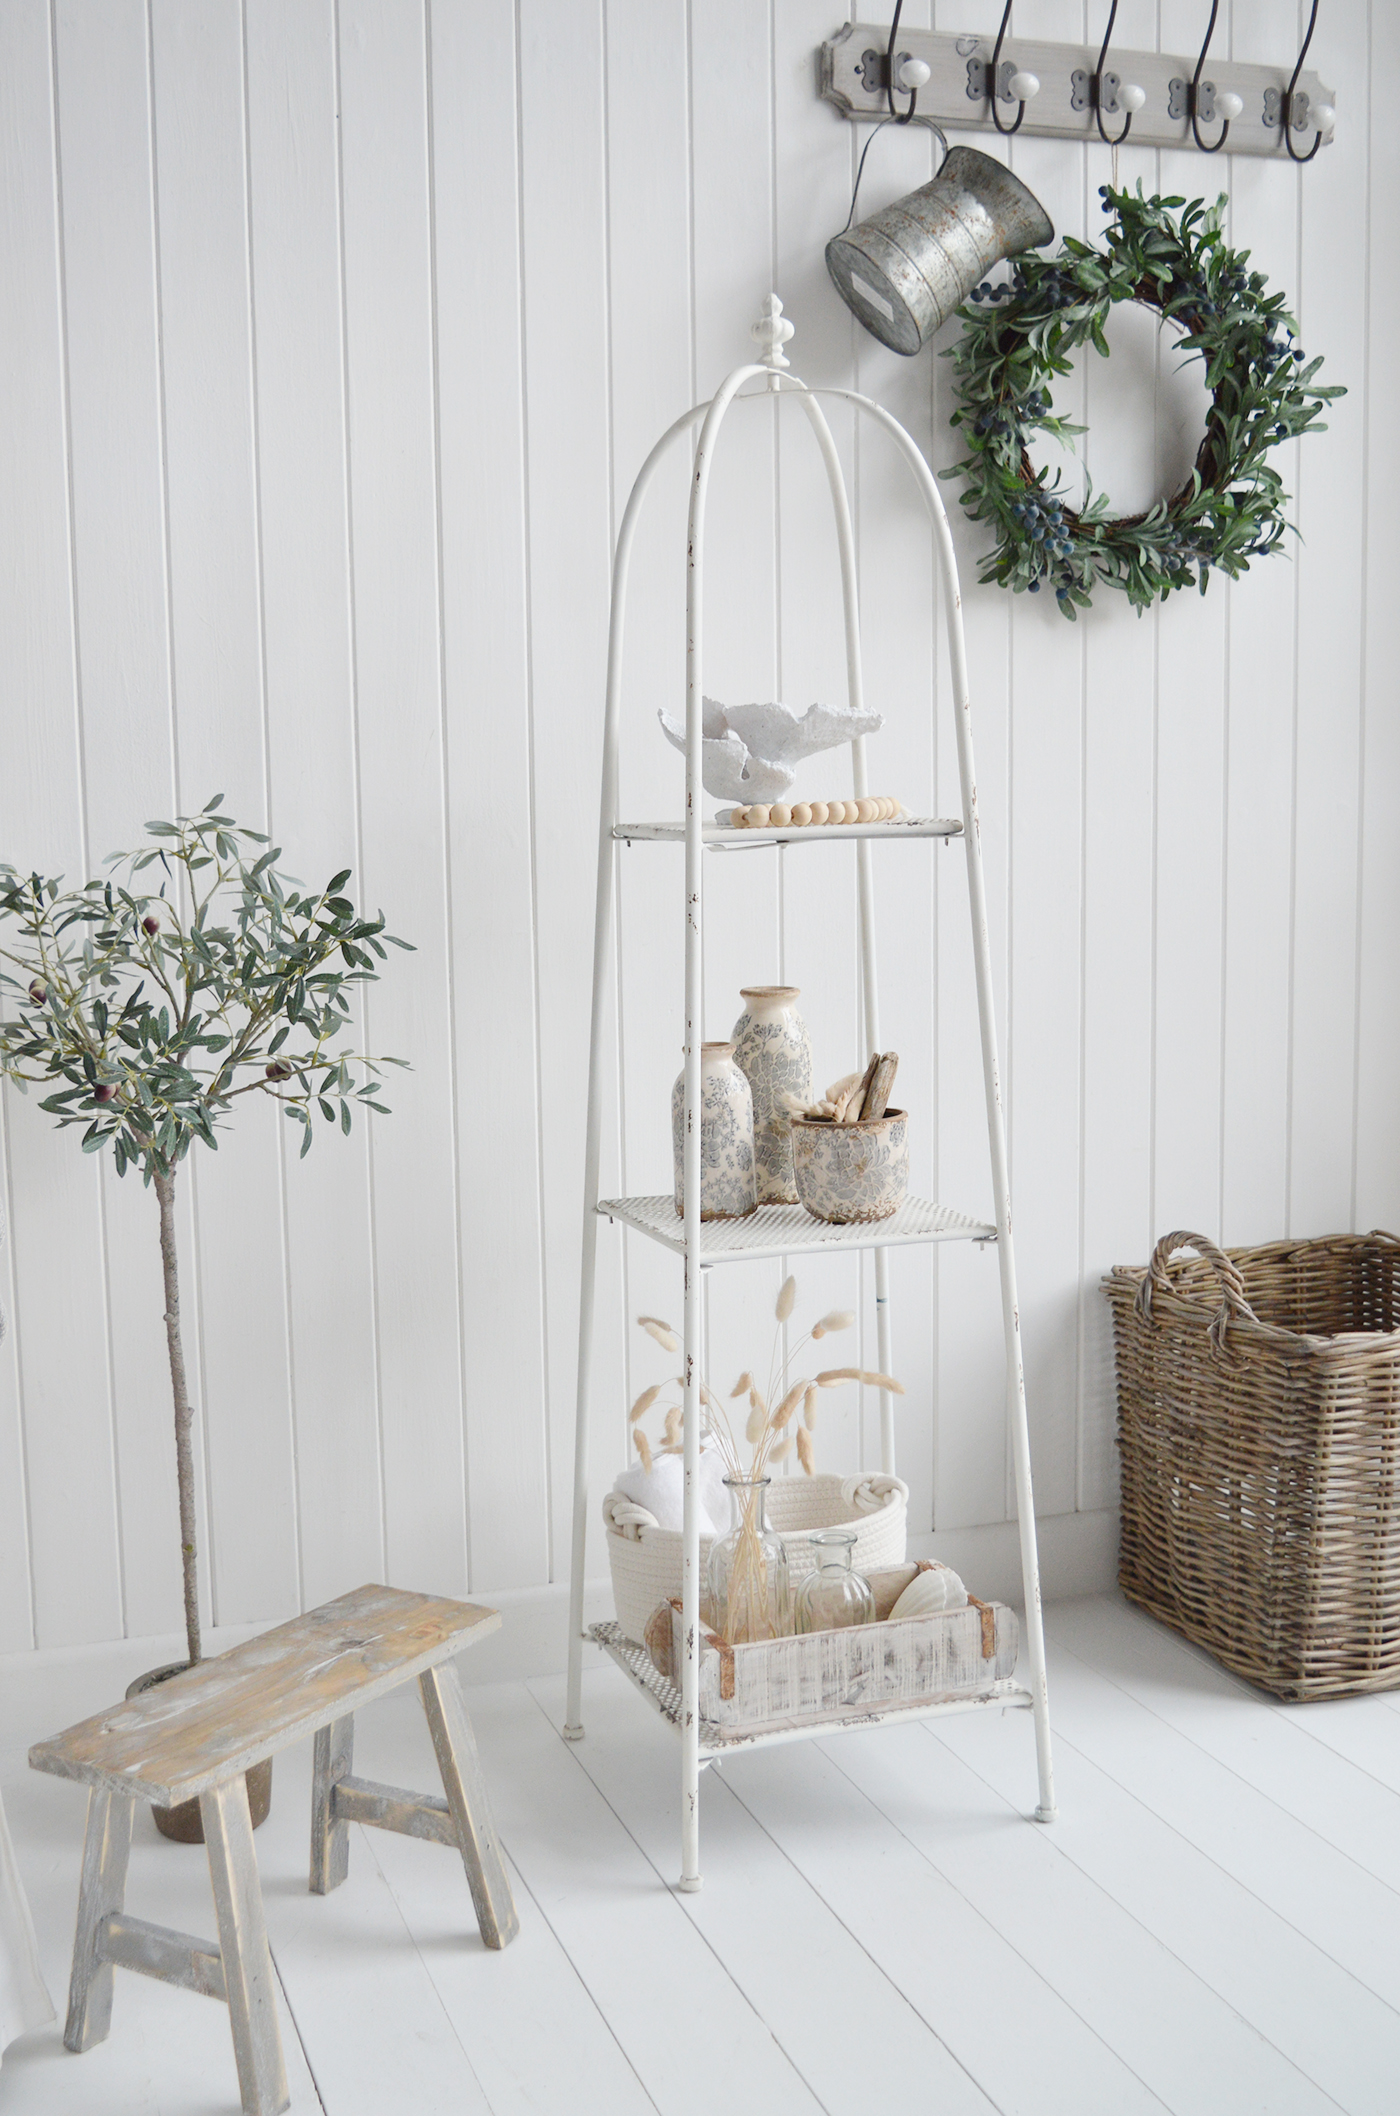 Chesterville White Freestanding Shelf - New England White Furniture for coastal and country homes and interiors